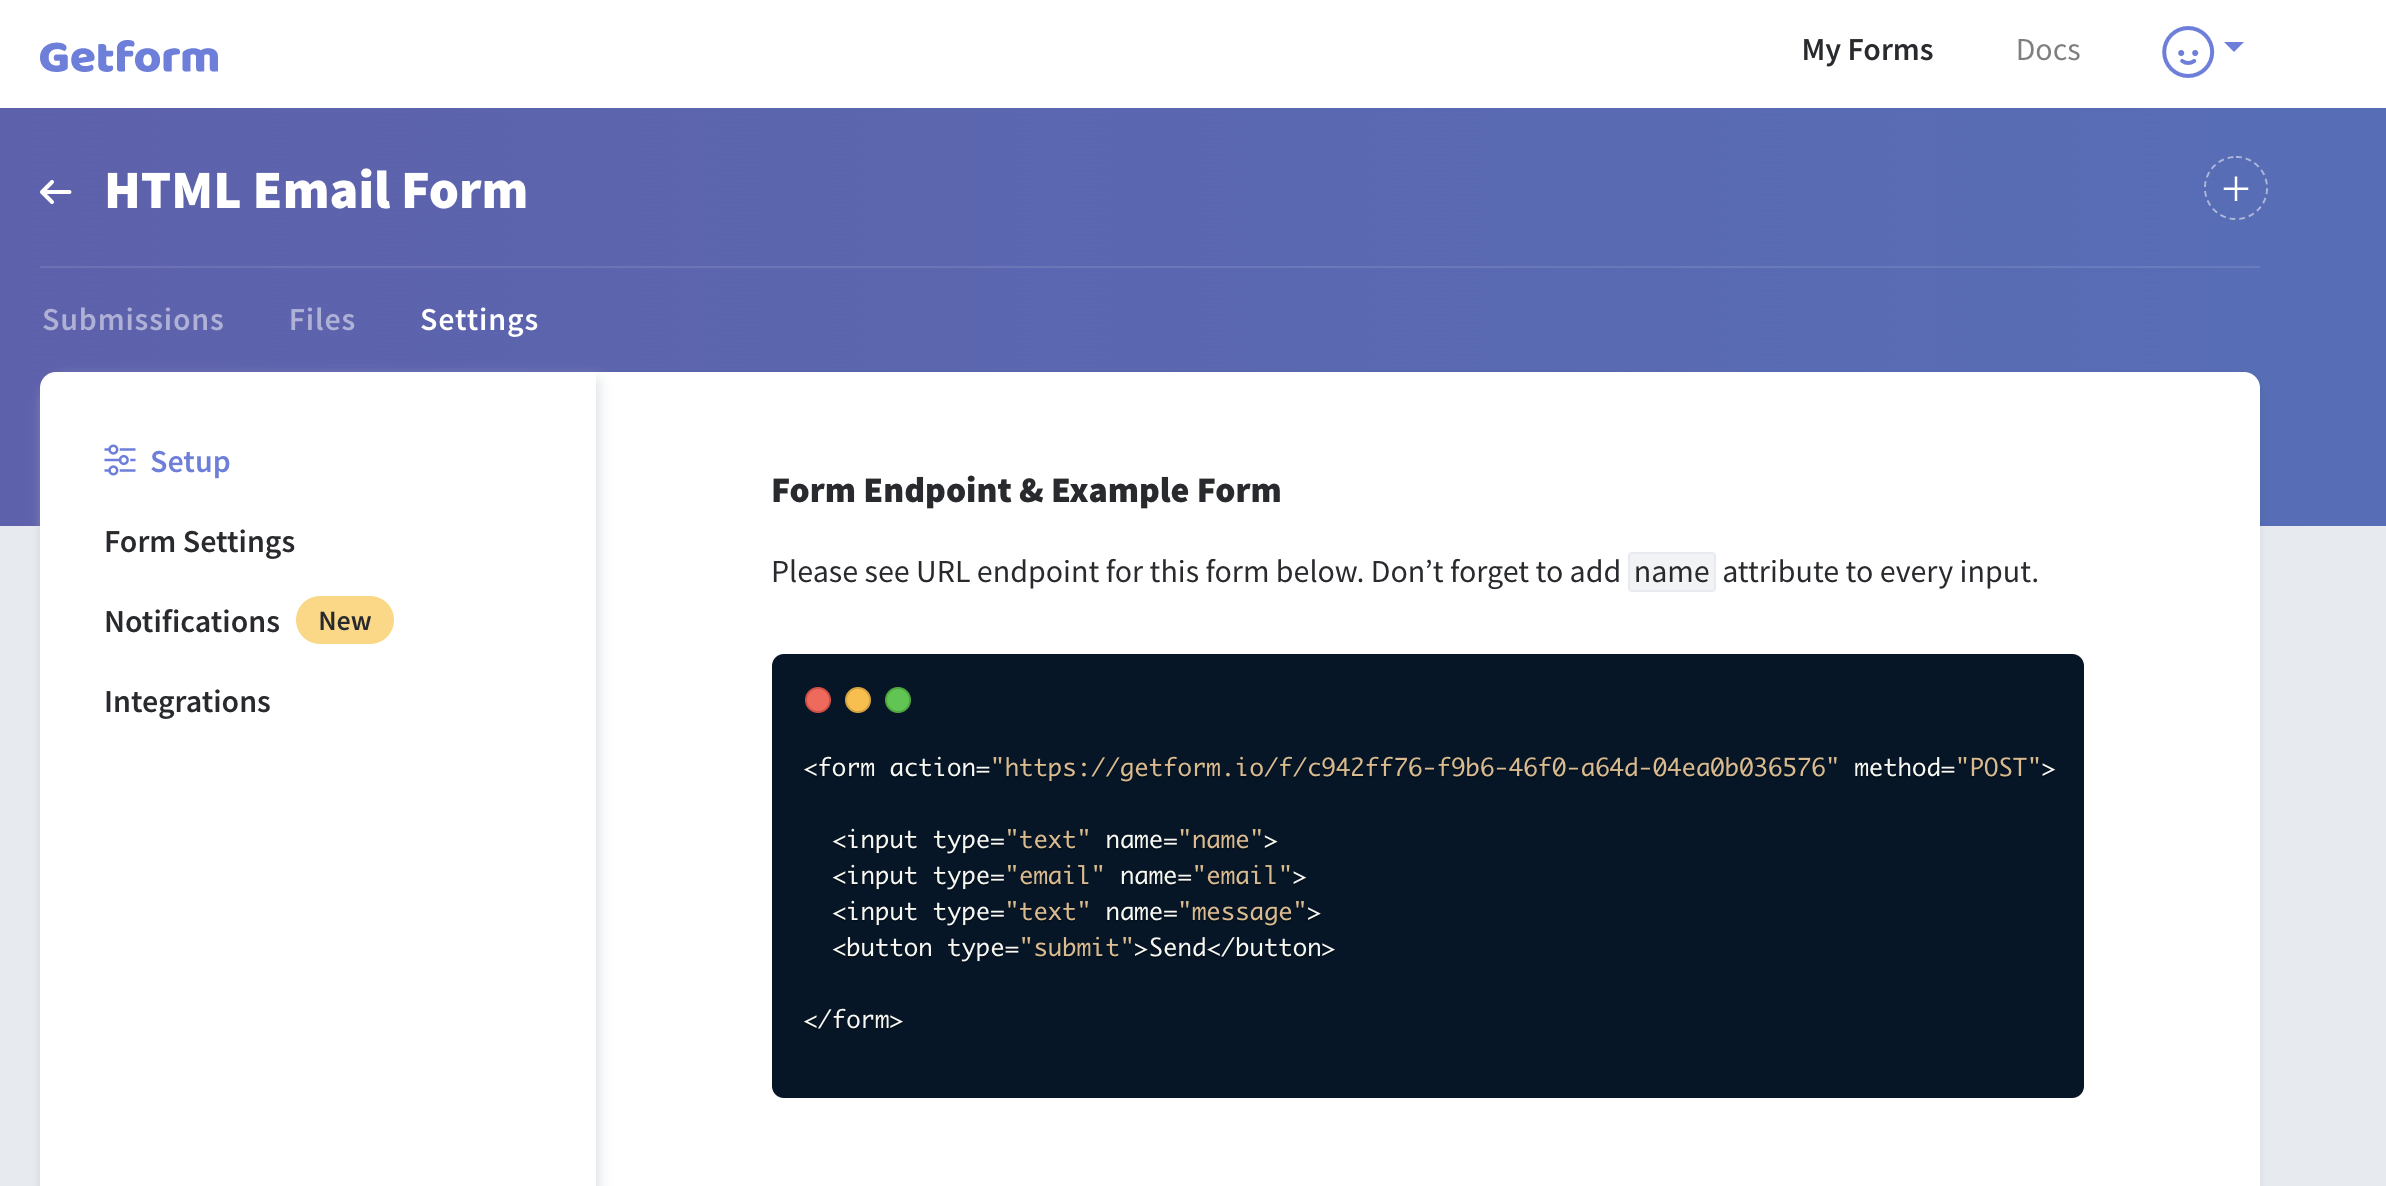 Form html type. Submit html. Form button submit. Form Action html. Button Type html.